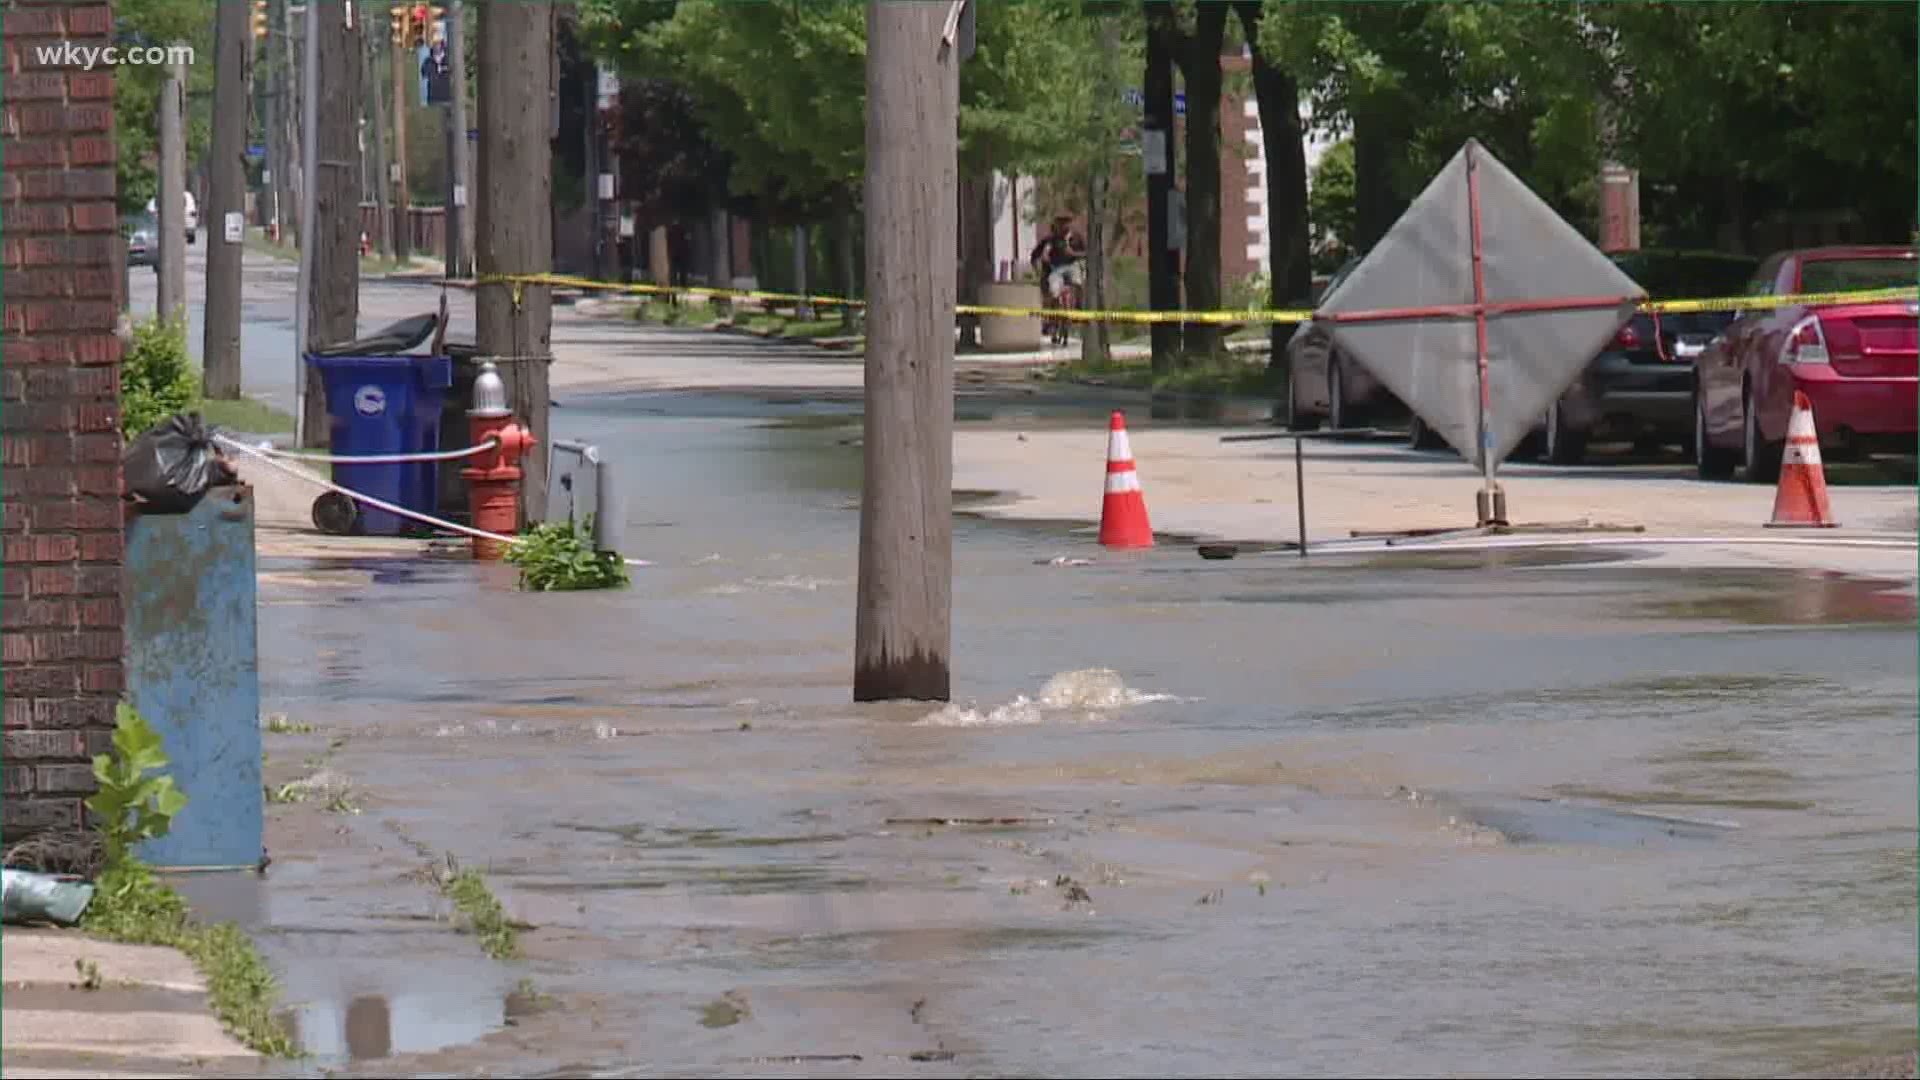 The areas has seen several water main breaks Sunday. Crews are still working to repair some of them.